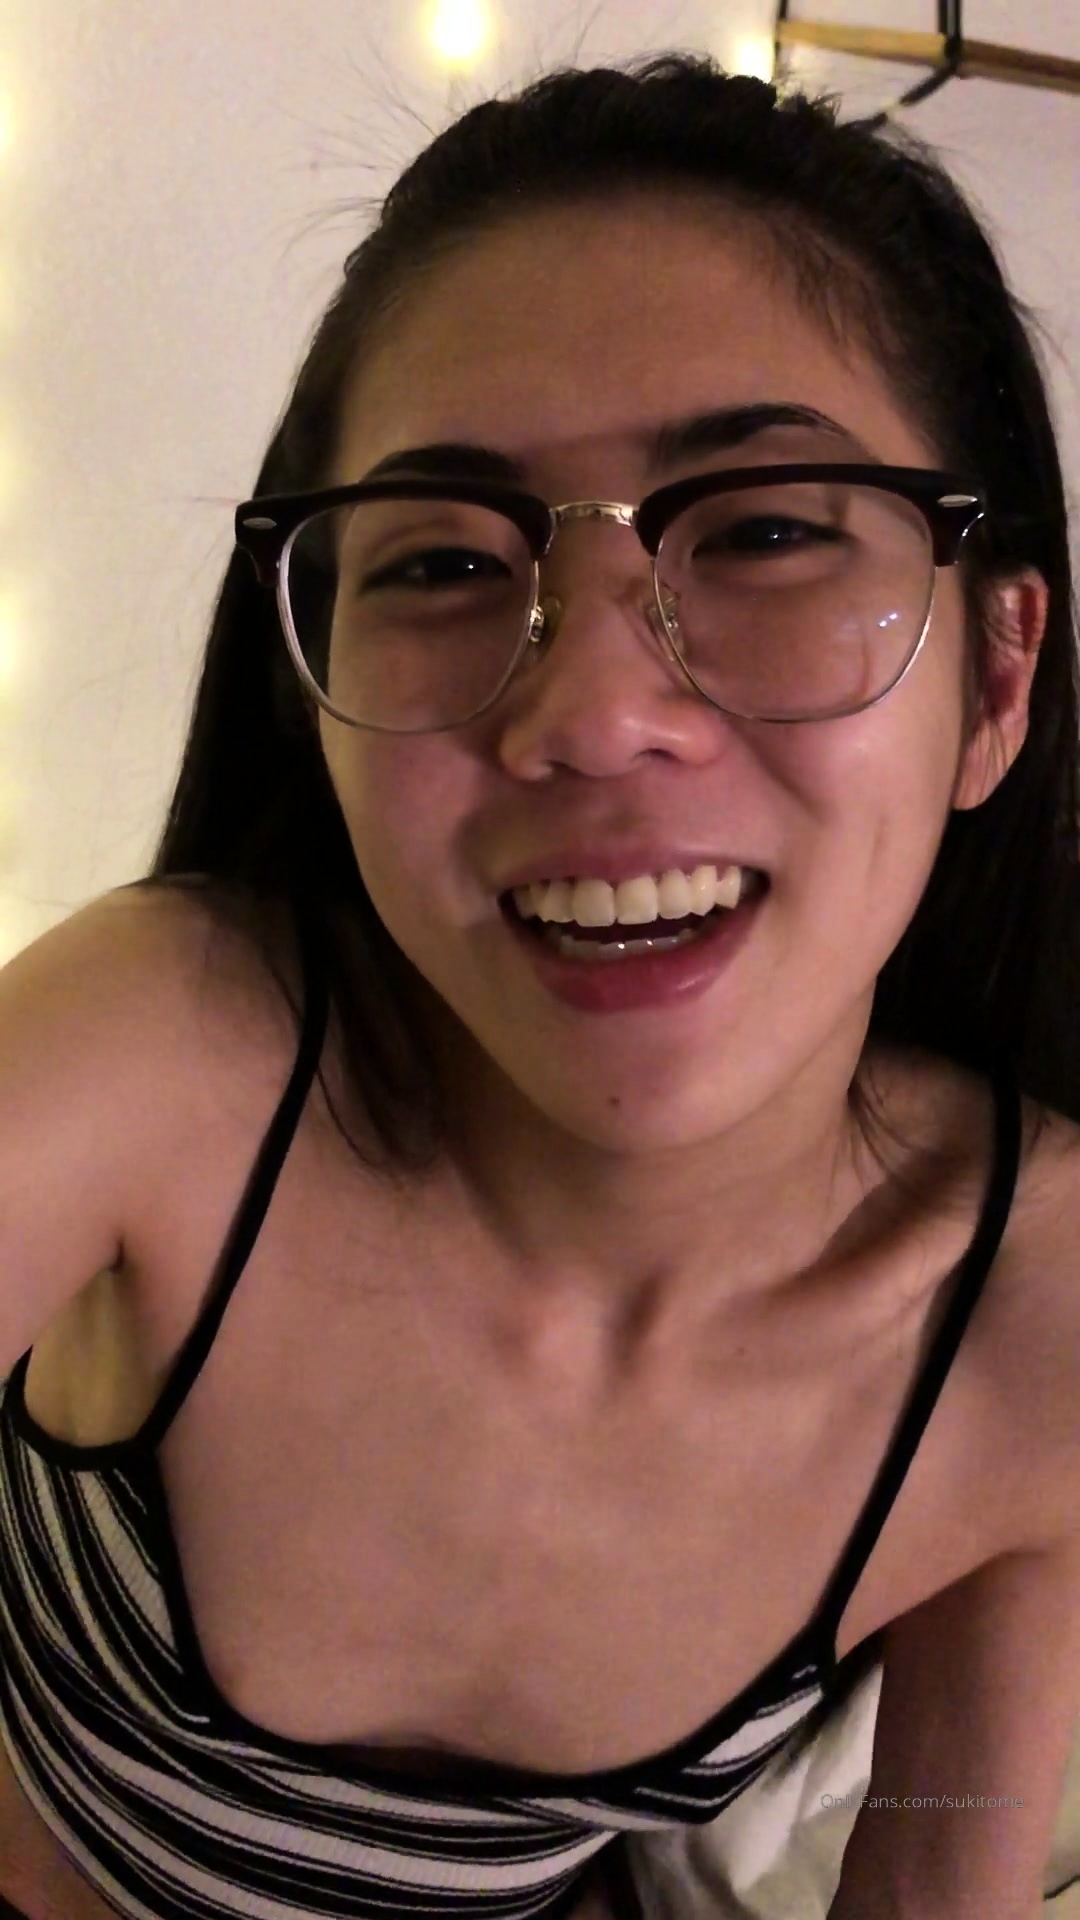 Tumblr Anal Solo - Free Mobile Porn - Webcam Asian Chick Anal Masturbation Tease - 4891497 -  IcePorn.com